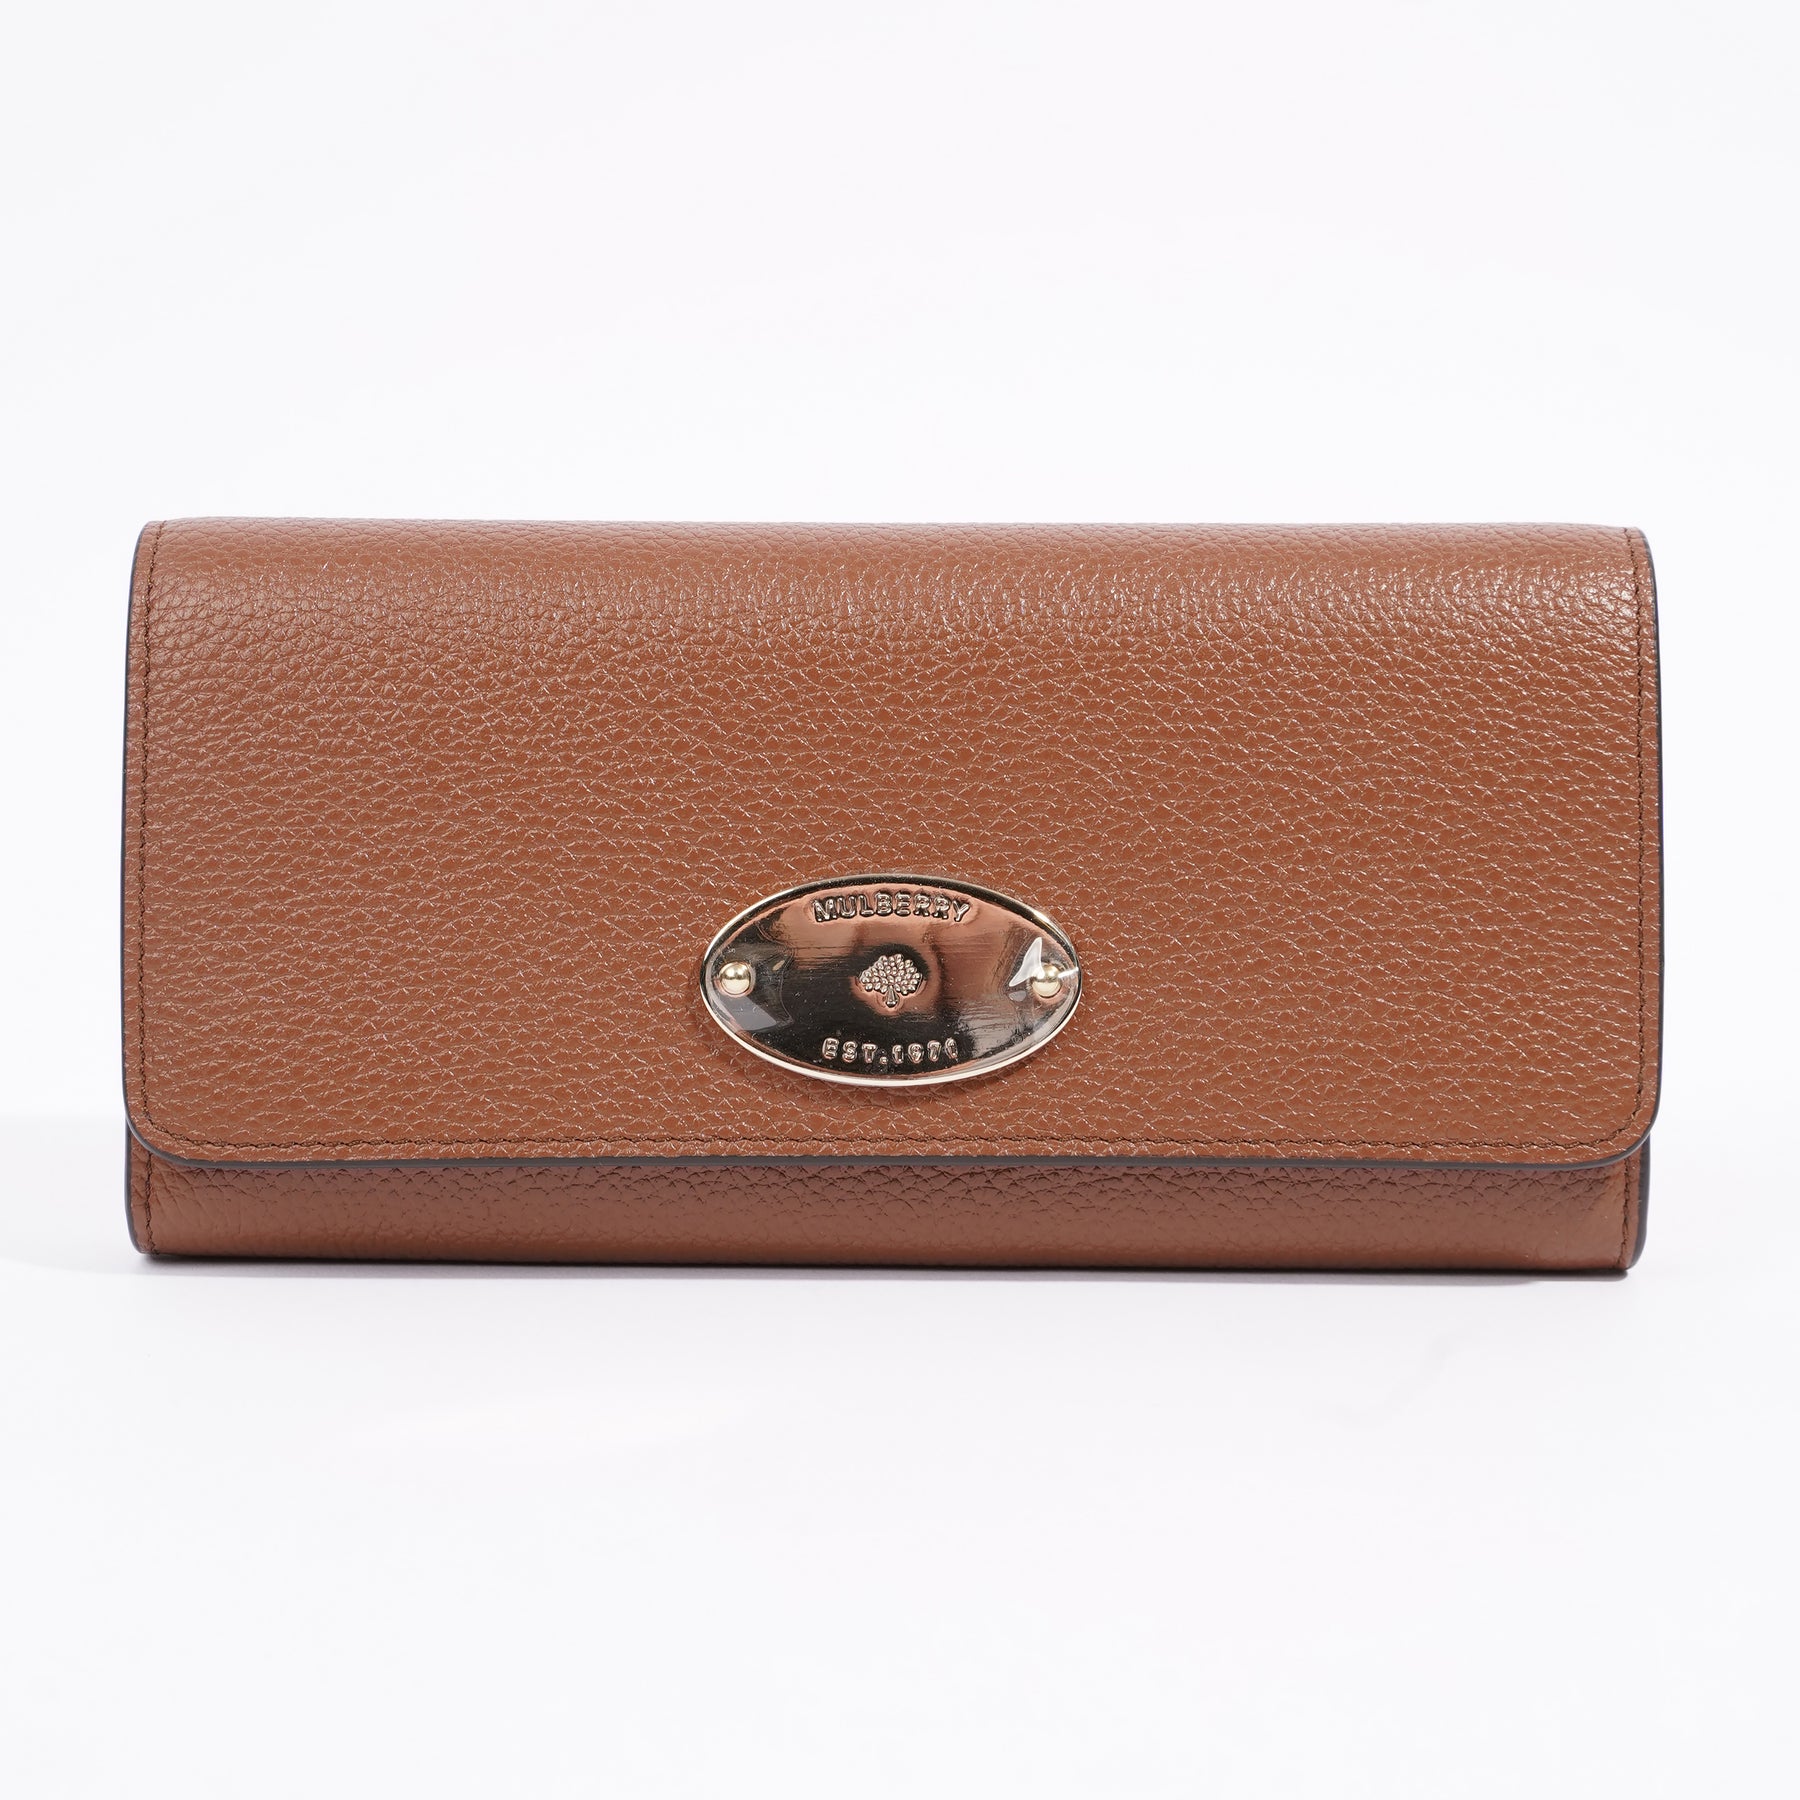 Mulberry – The Preloved Bag Boutique